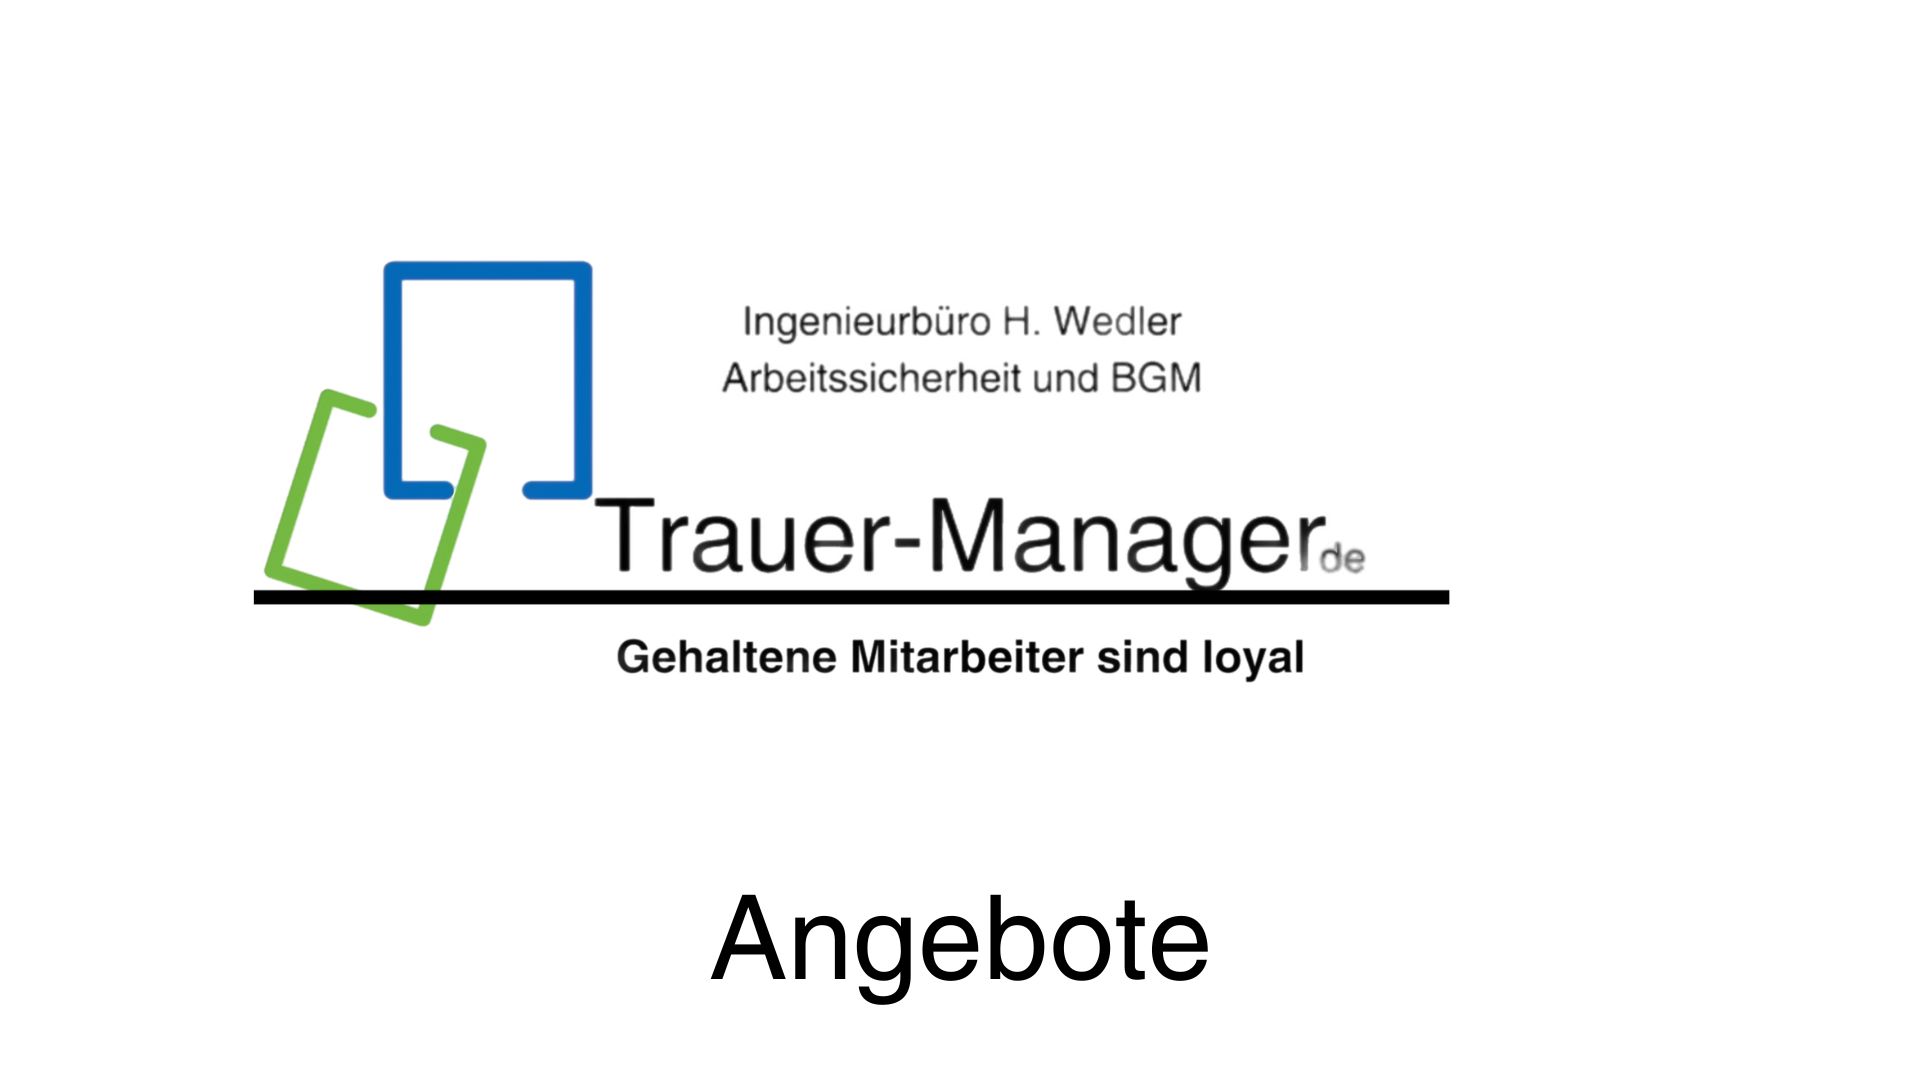 Trauermanager Angebote